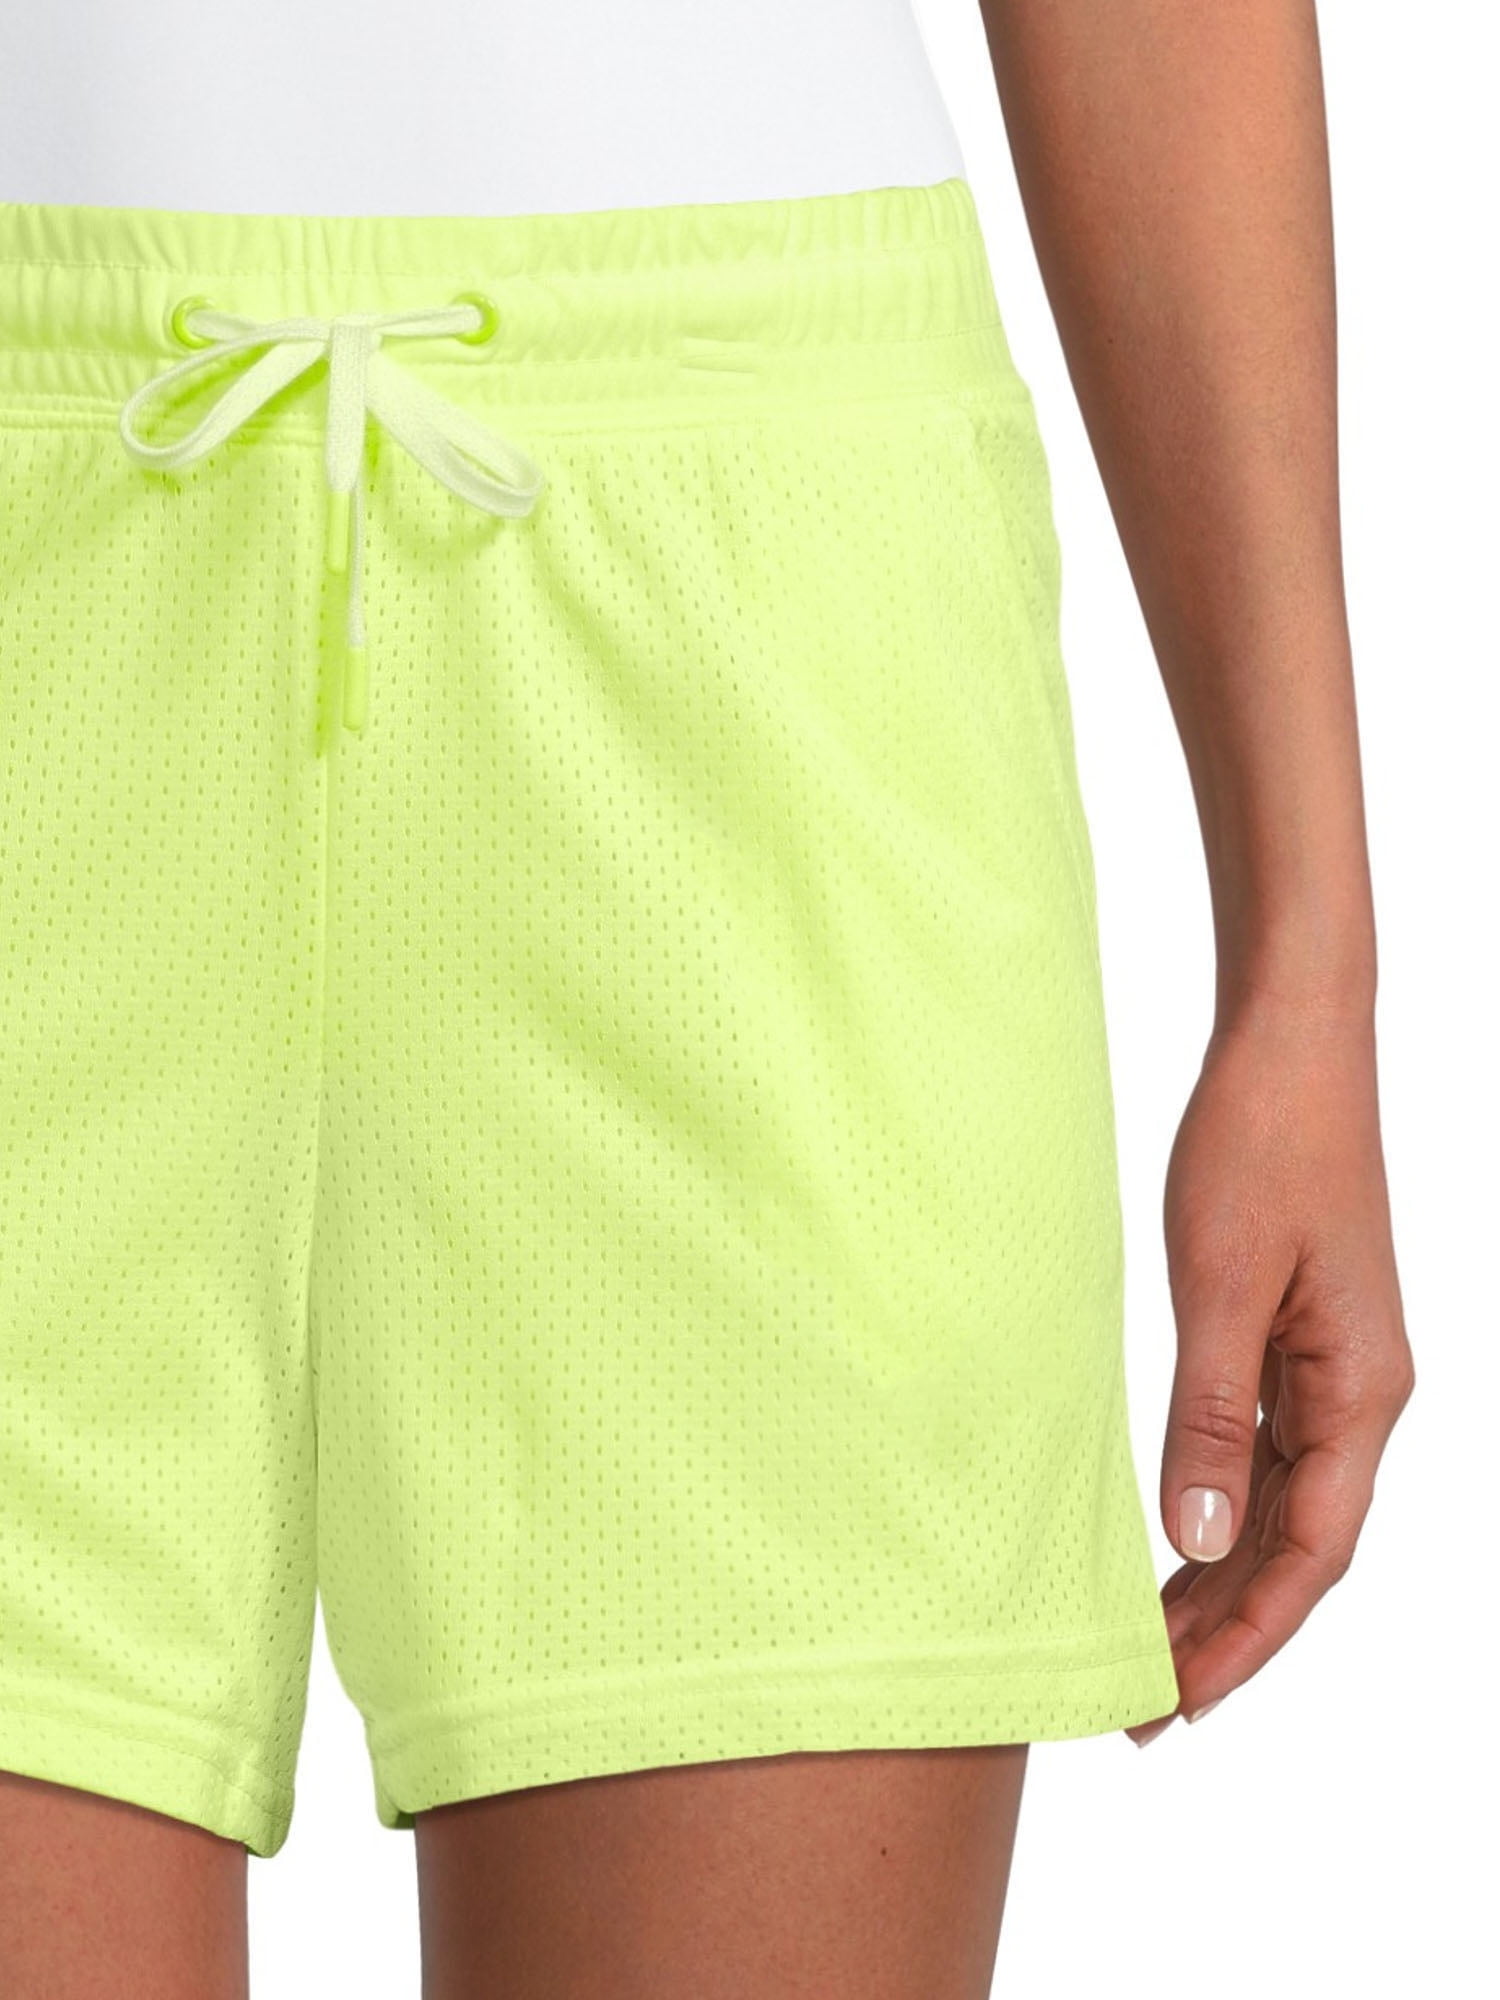 Mesh Shorts with Pockets: Ultimate Workout Shorts